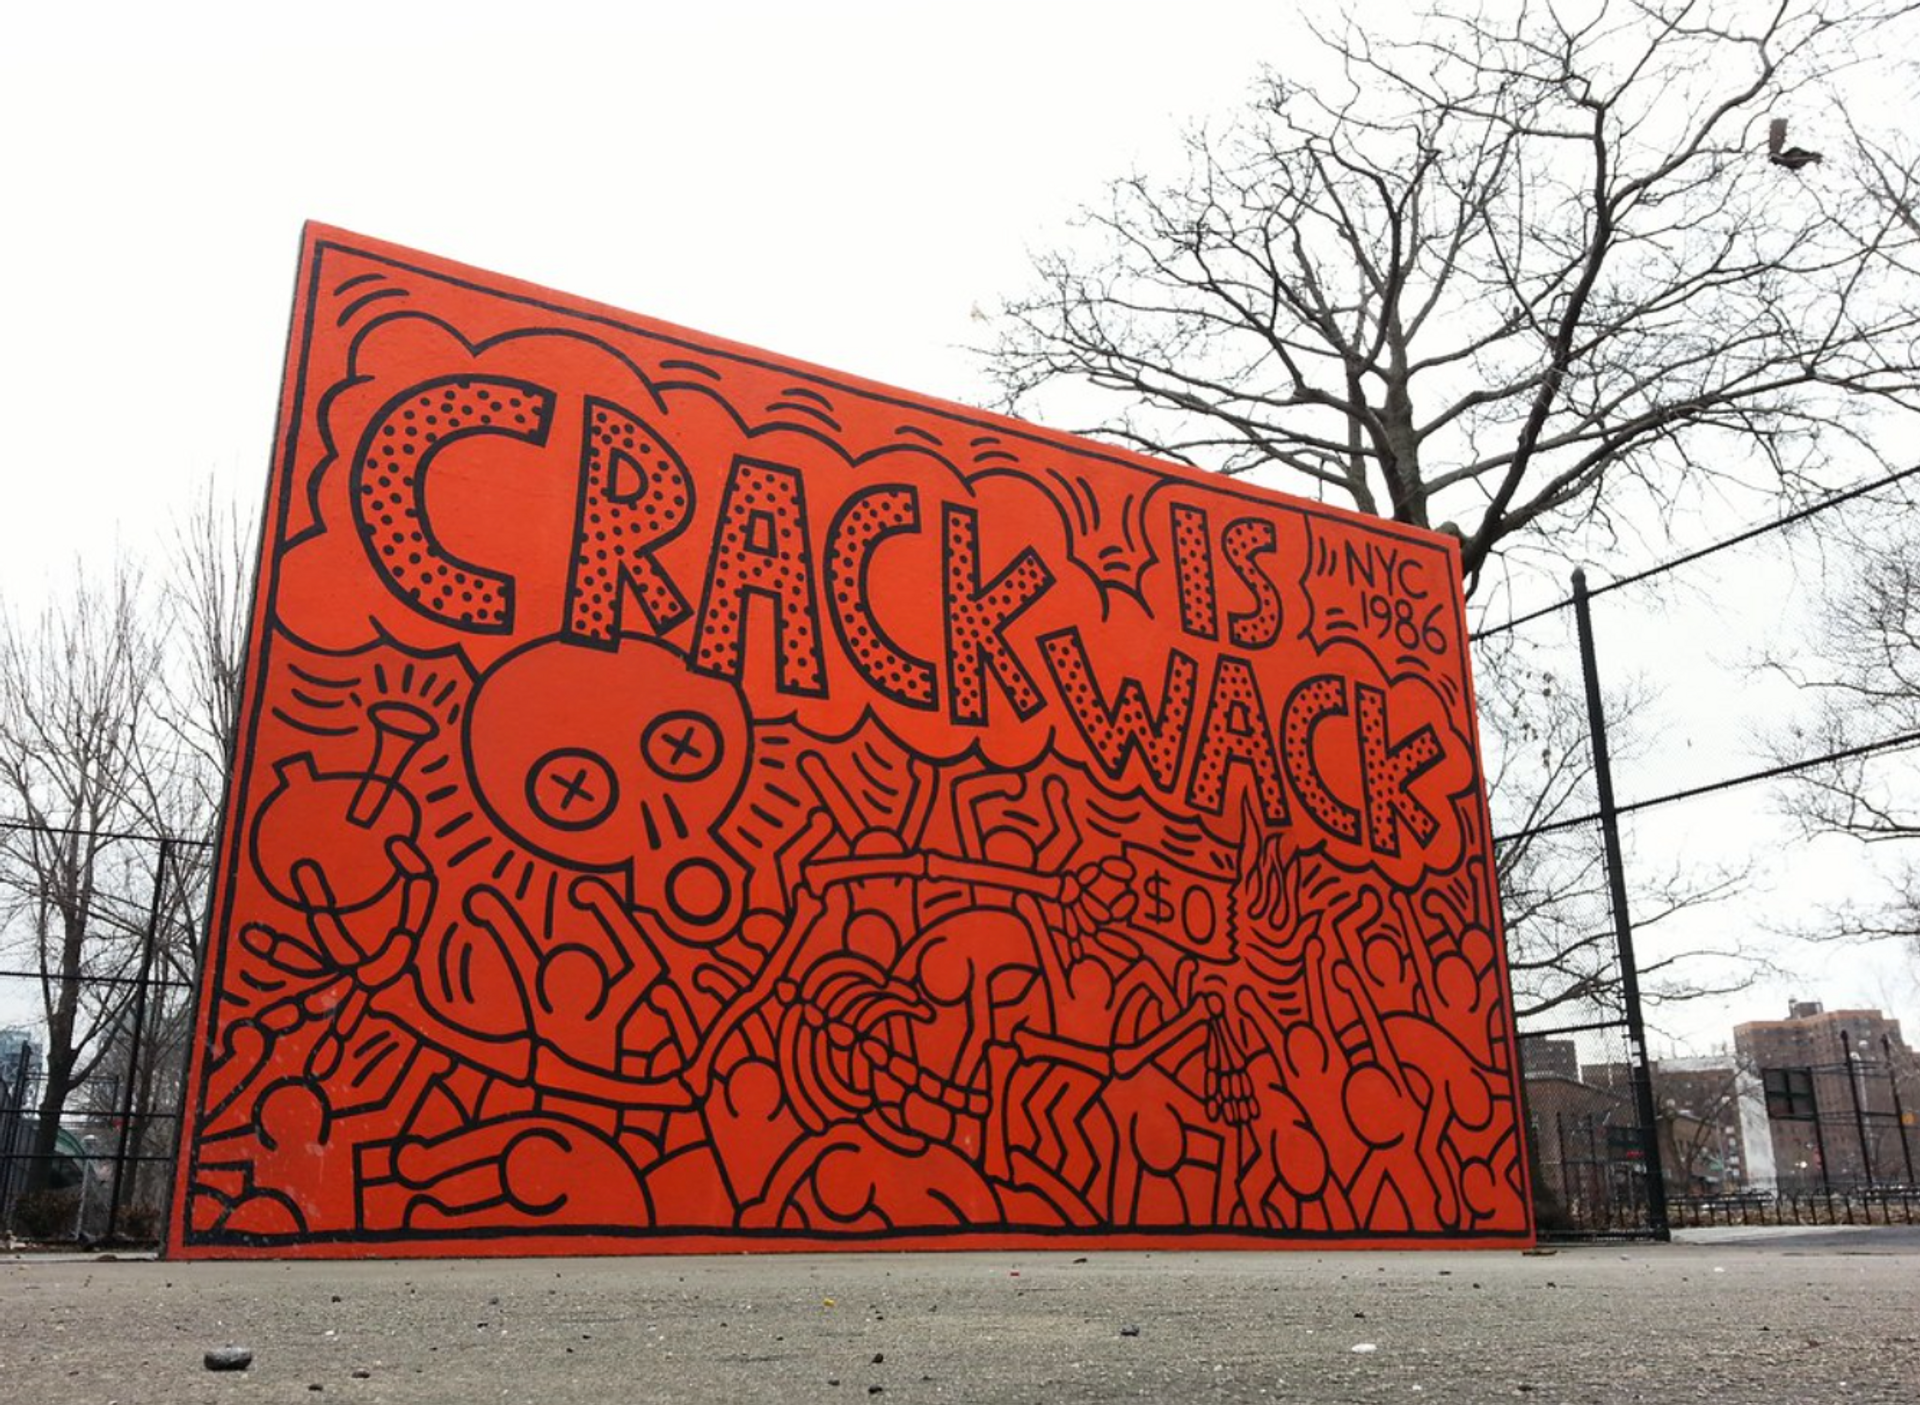 Crack is Wack mural by Keith Haring